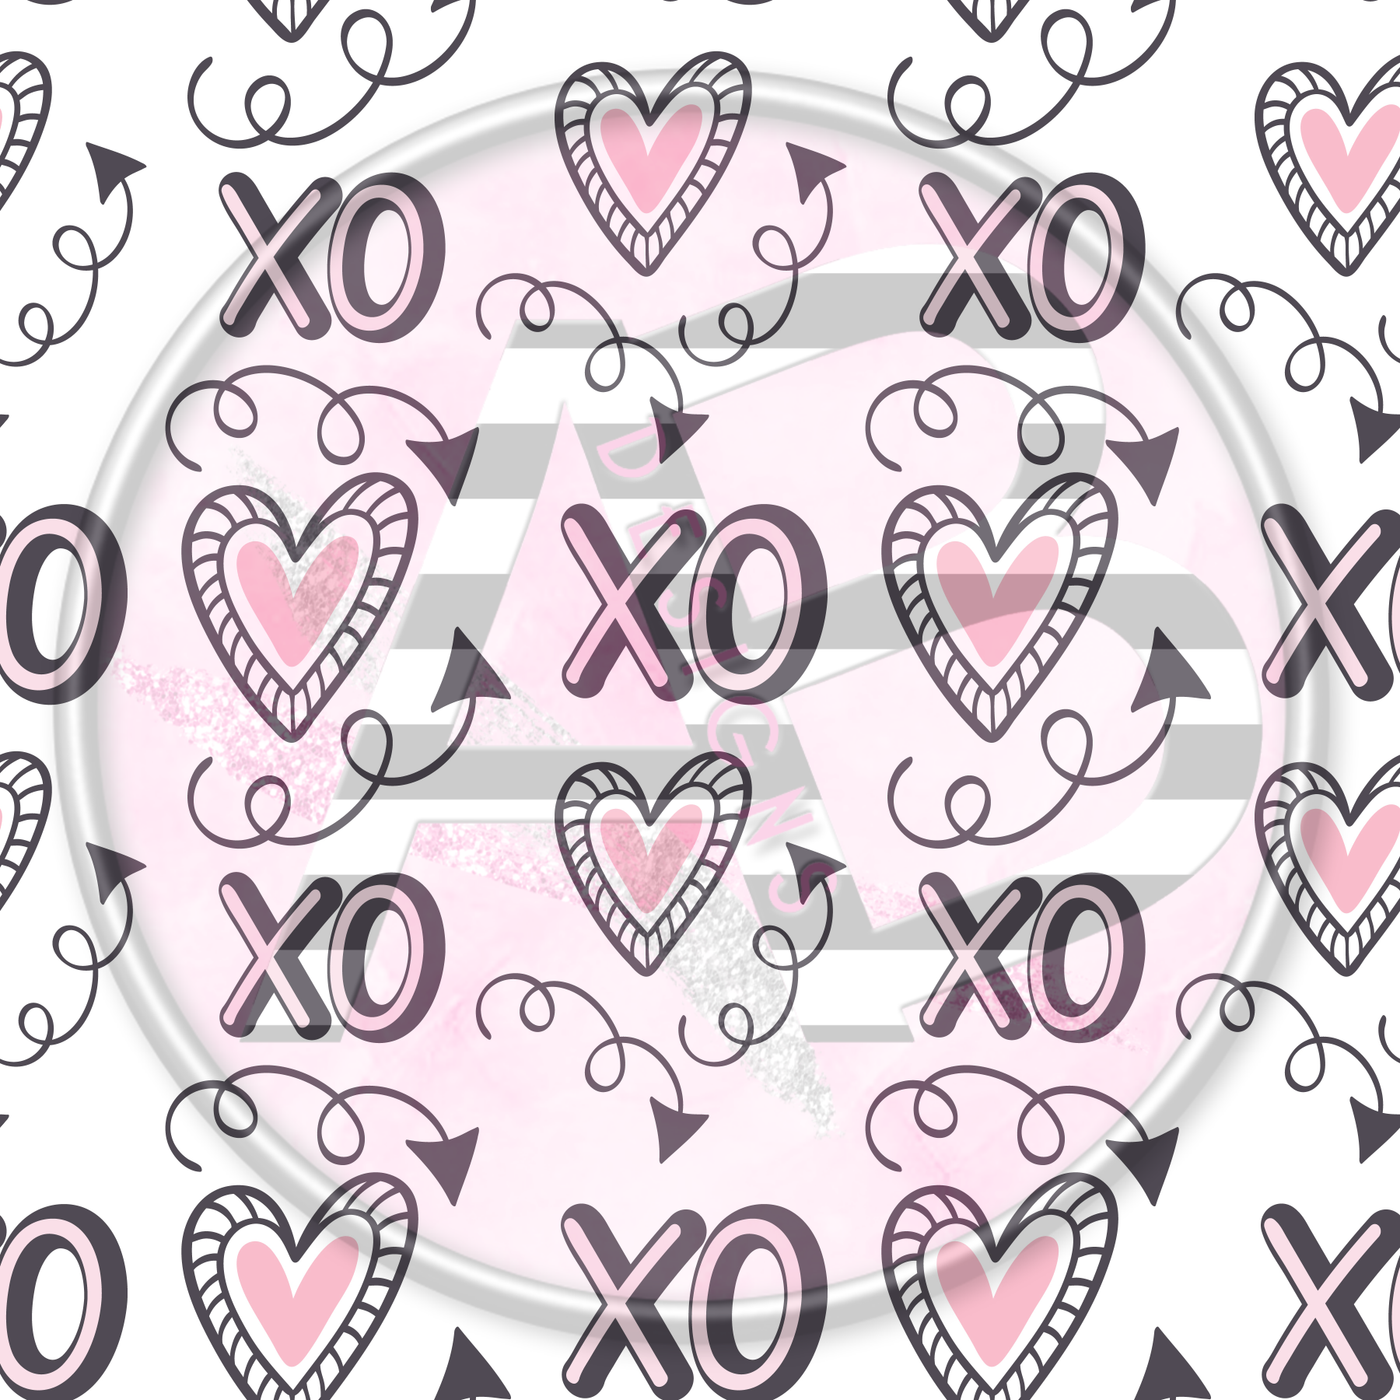 Adhesive Patterned Vinyl - Hearts 17